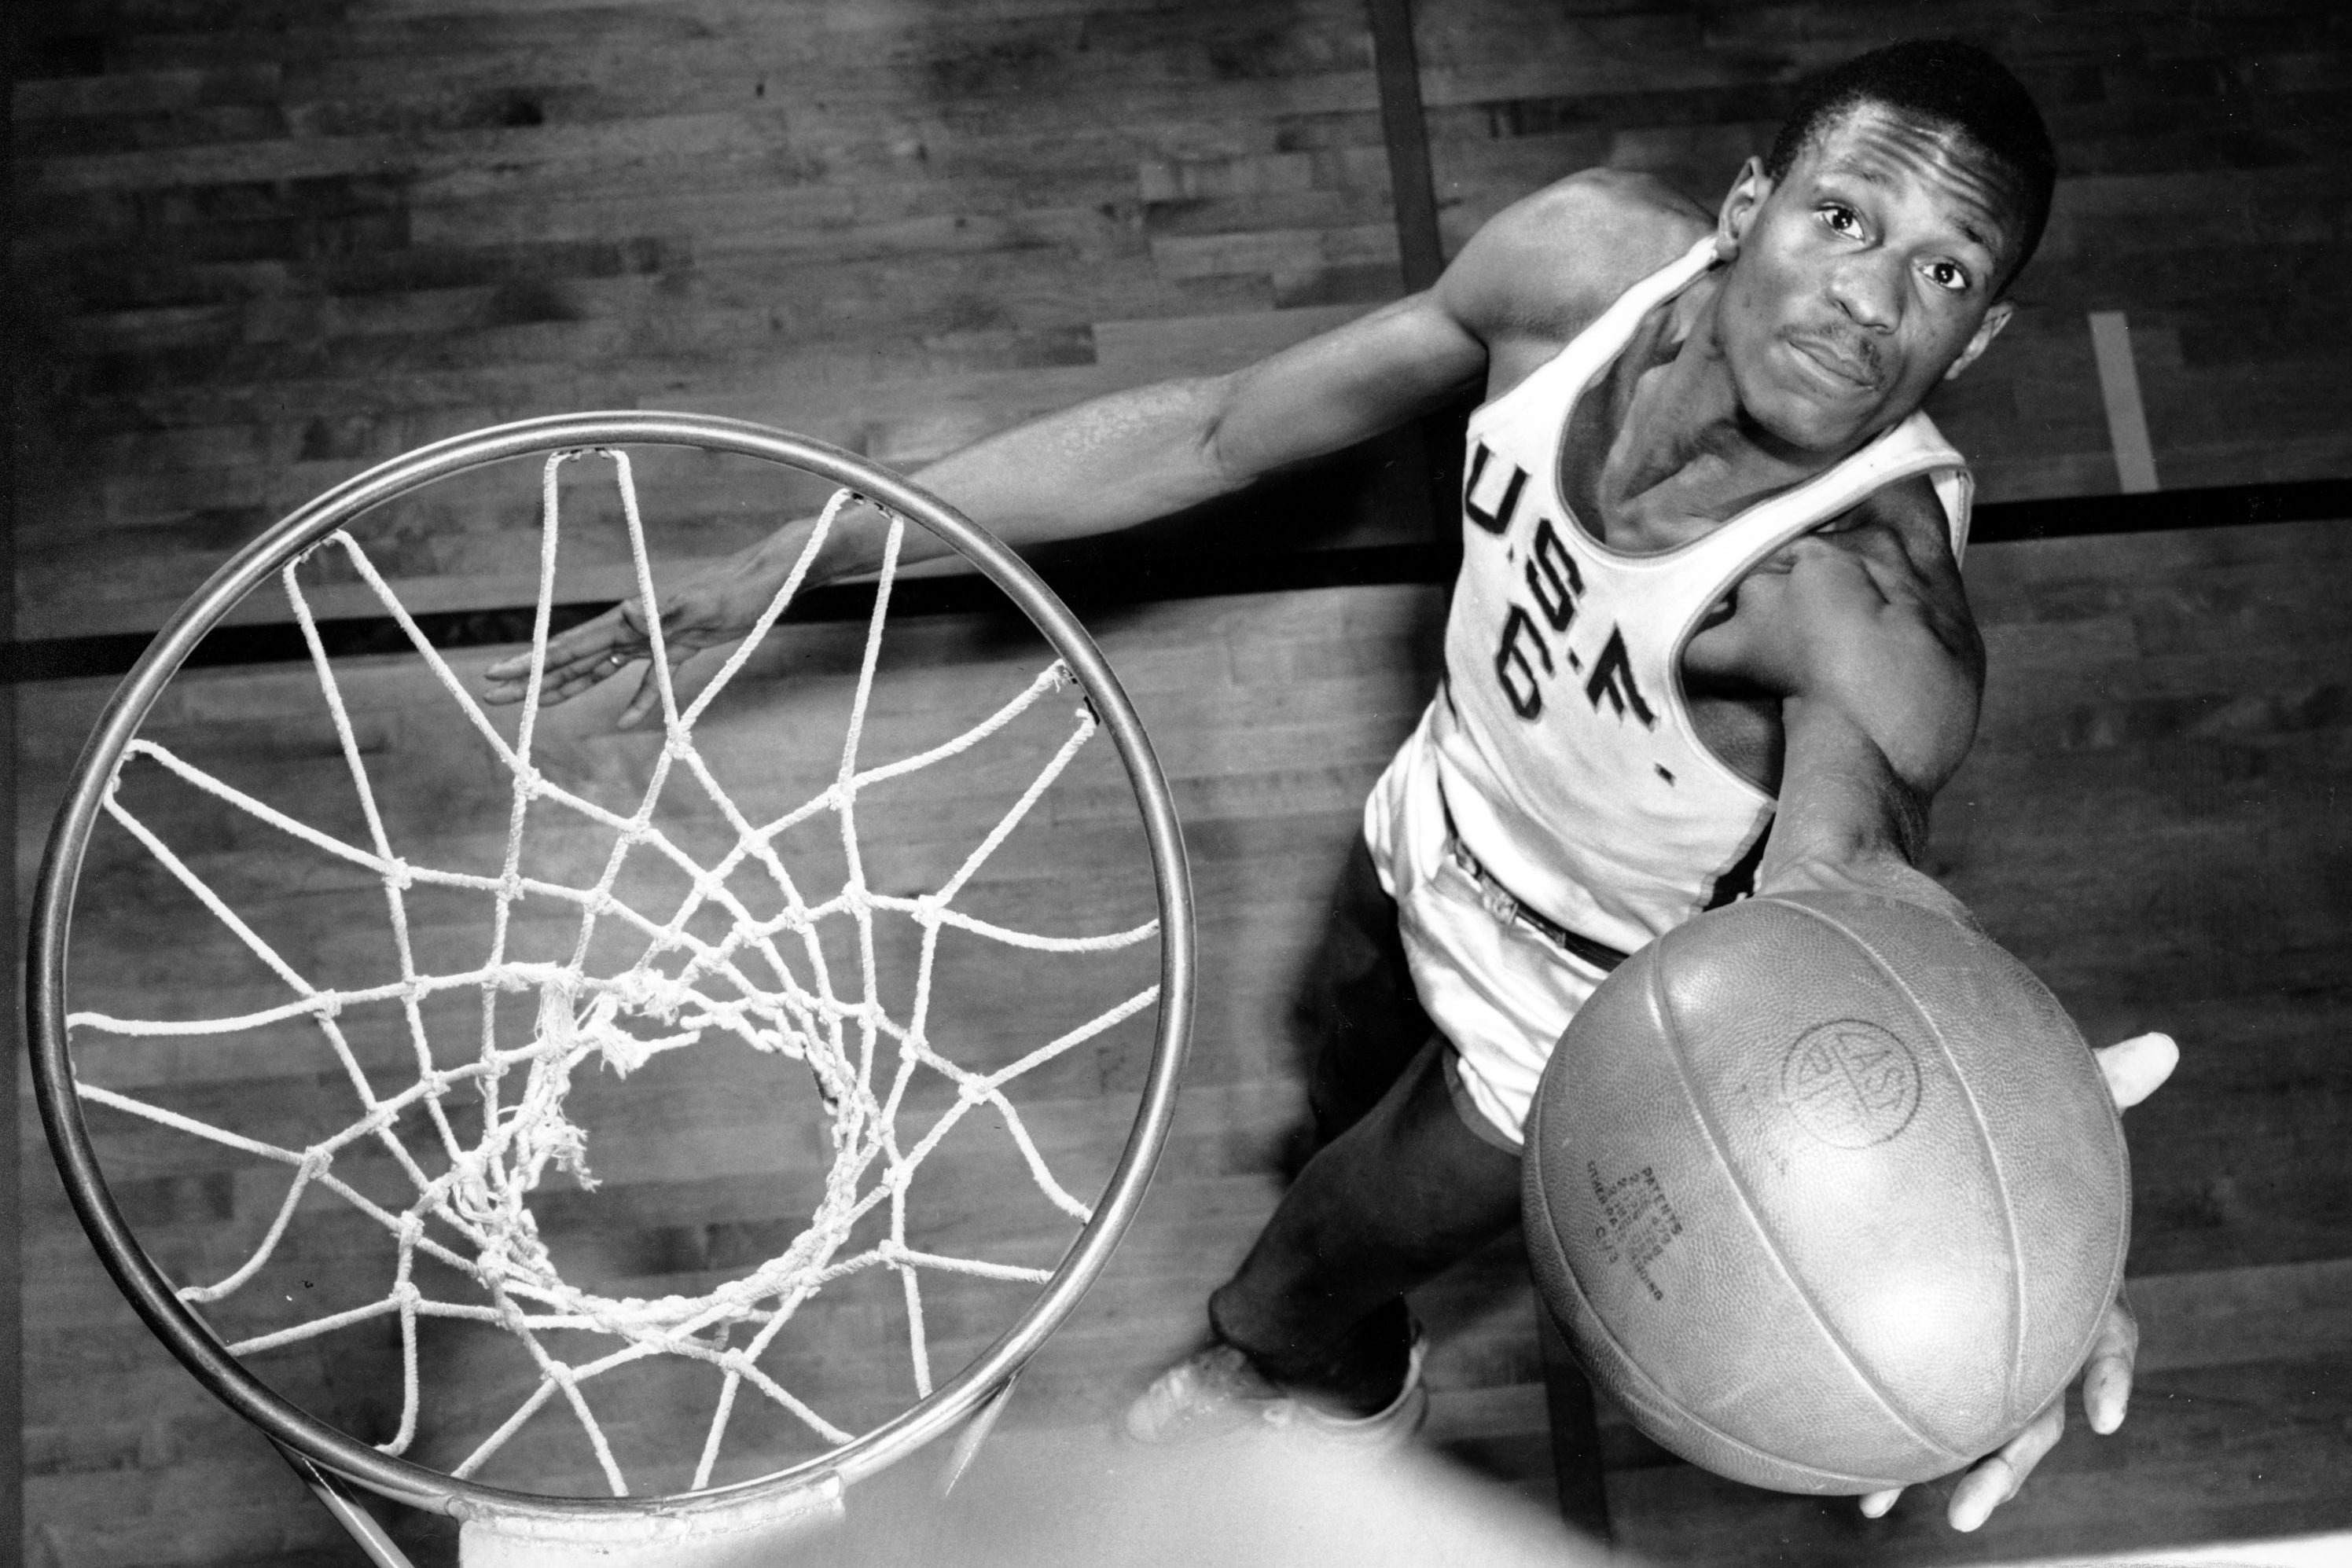 An overhead shot shows a very skinny, very young, goatee-less Bill Russell rising to the basket, a hopeful look in his eyes